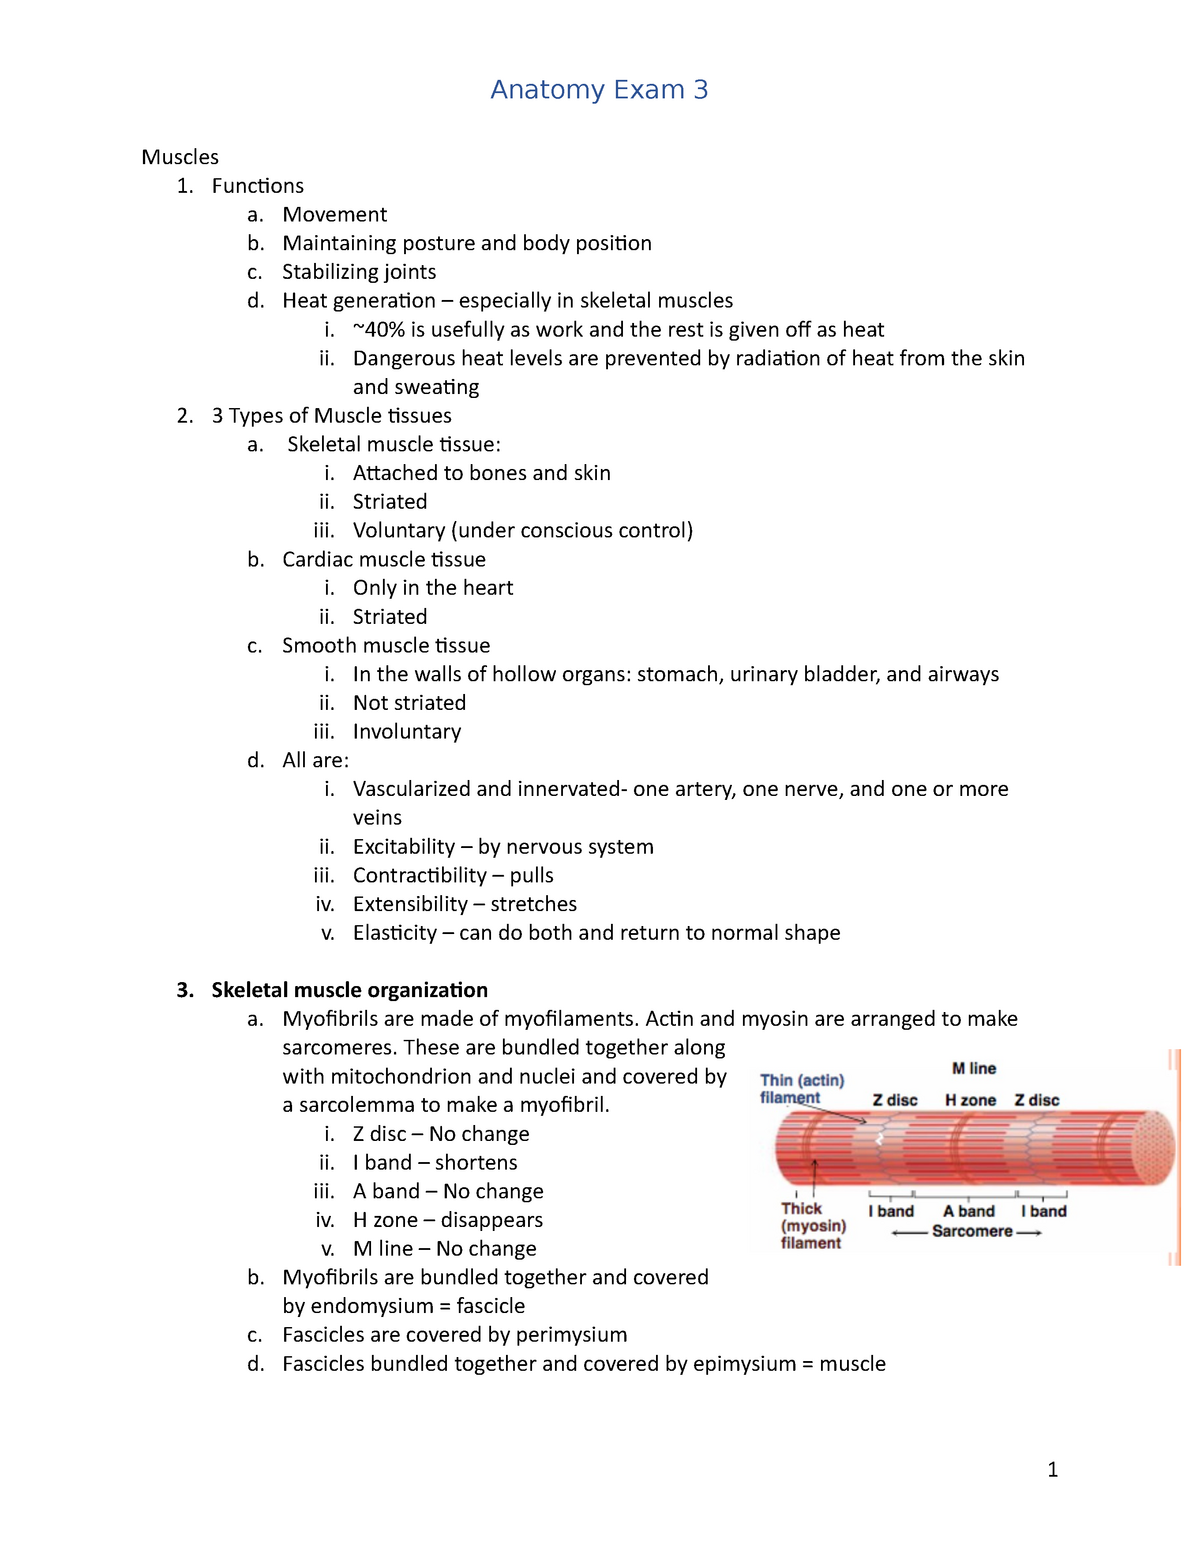 Anatomy Exam 3 Study Guide For Exam 3 Muscles 1 Functions A